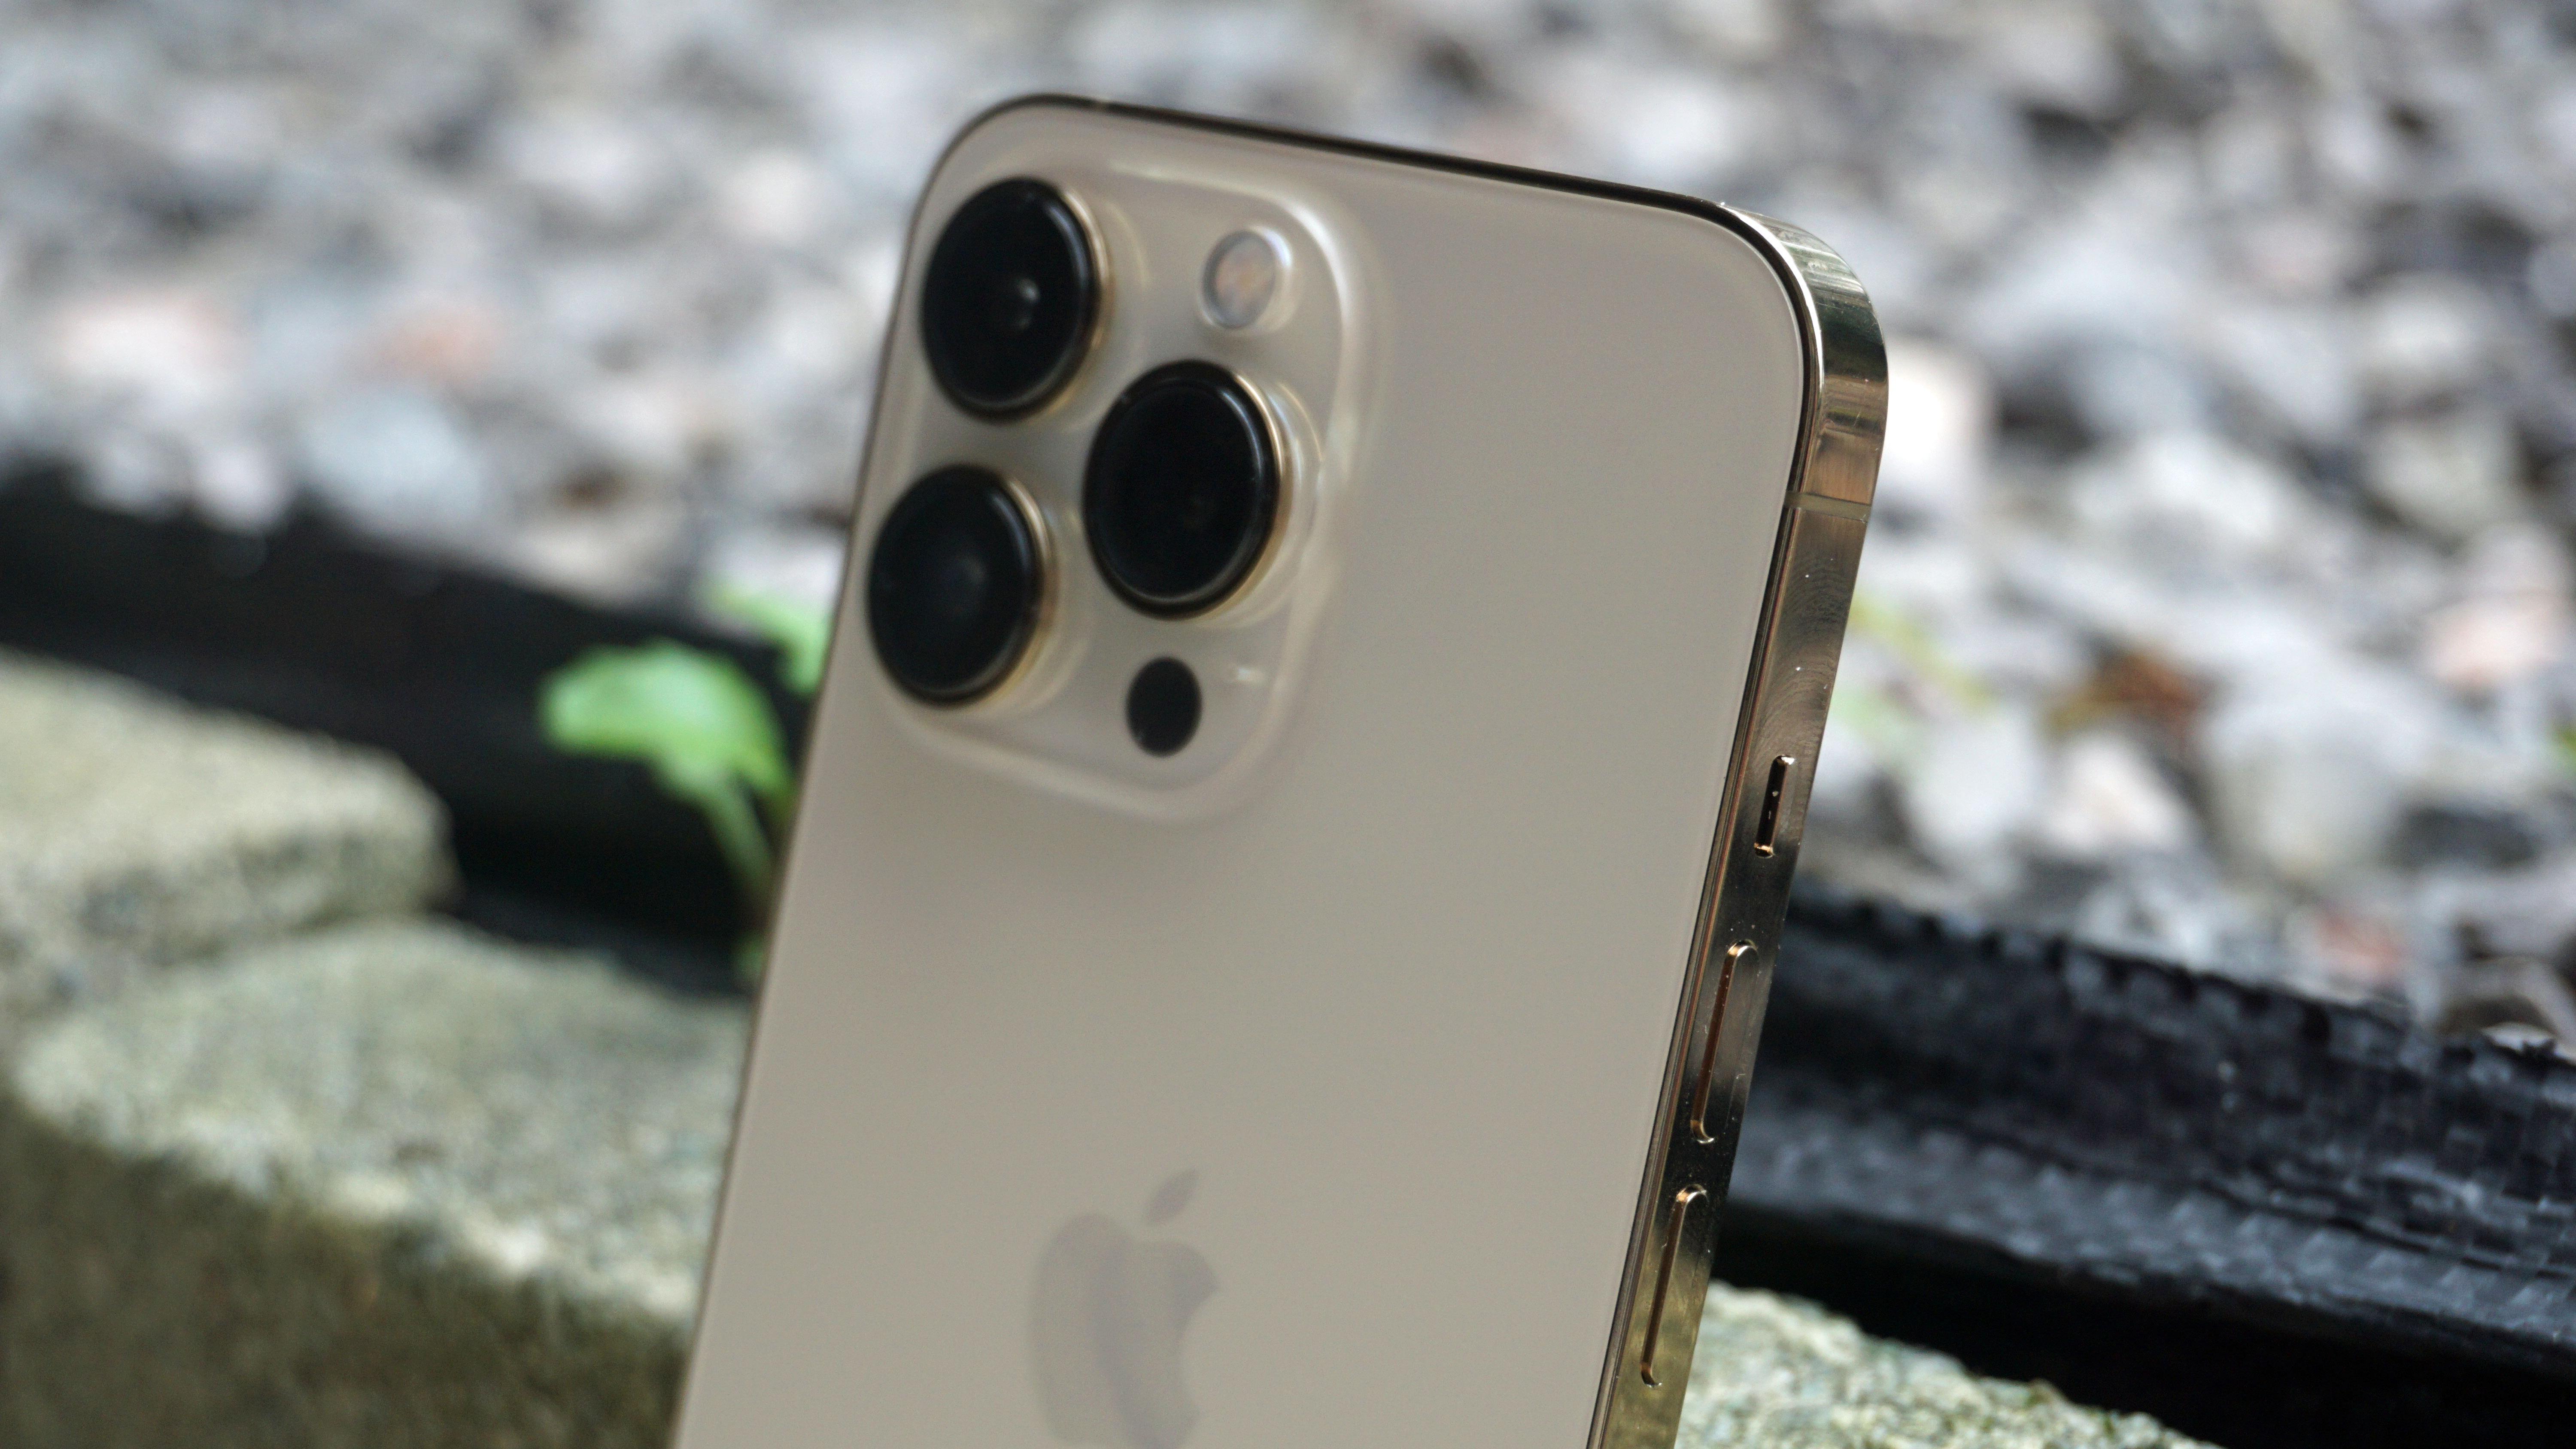 A close-up of the rear cameras on the iPhone 13 Pro